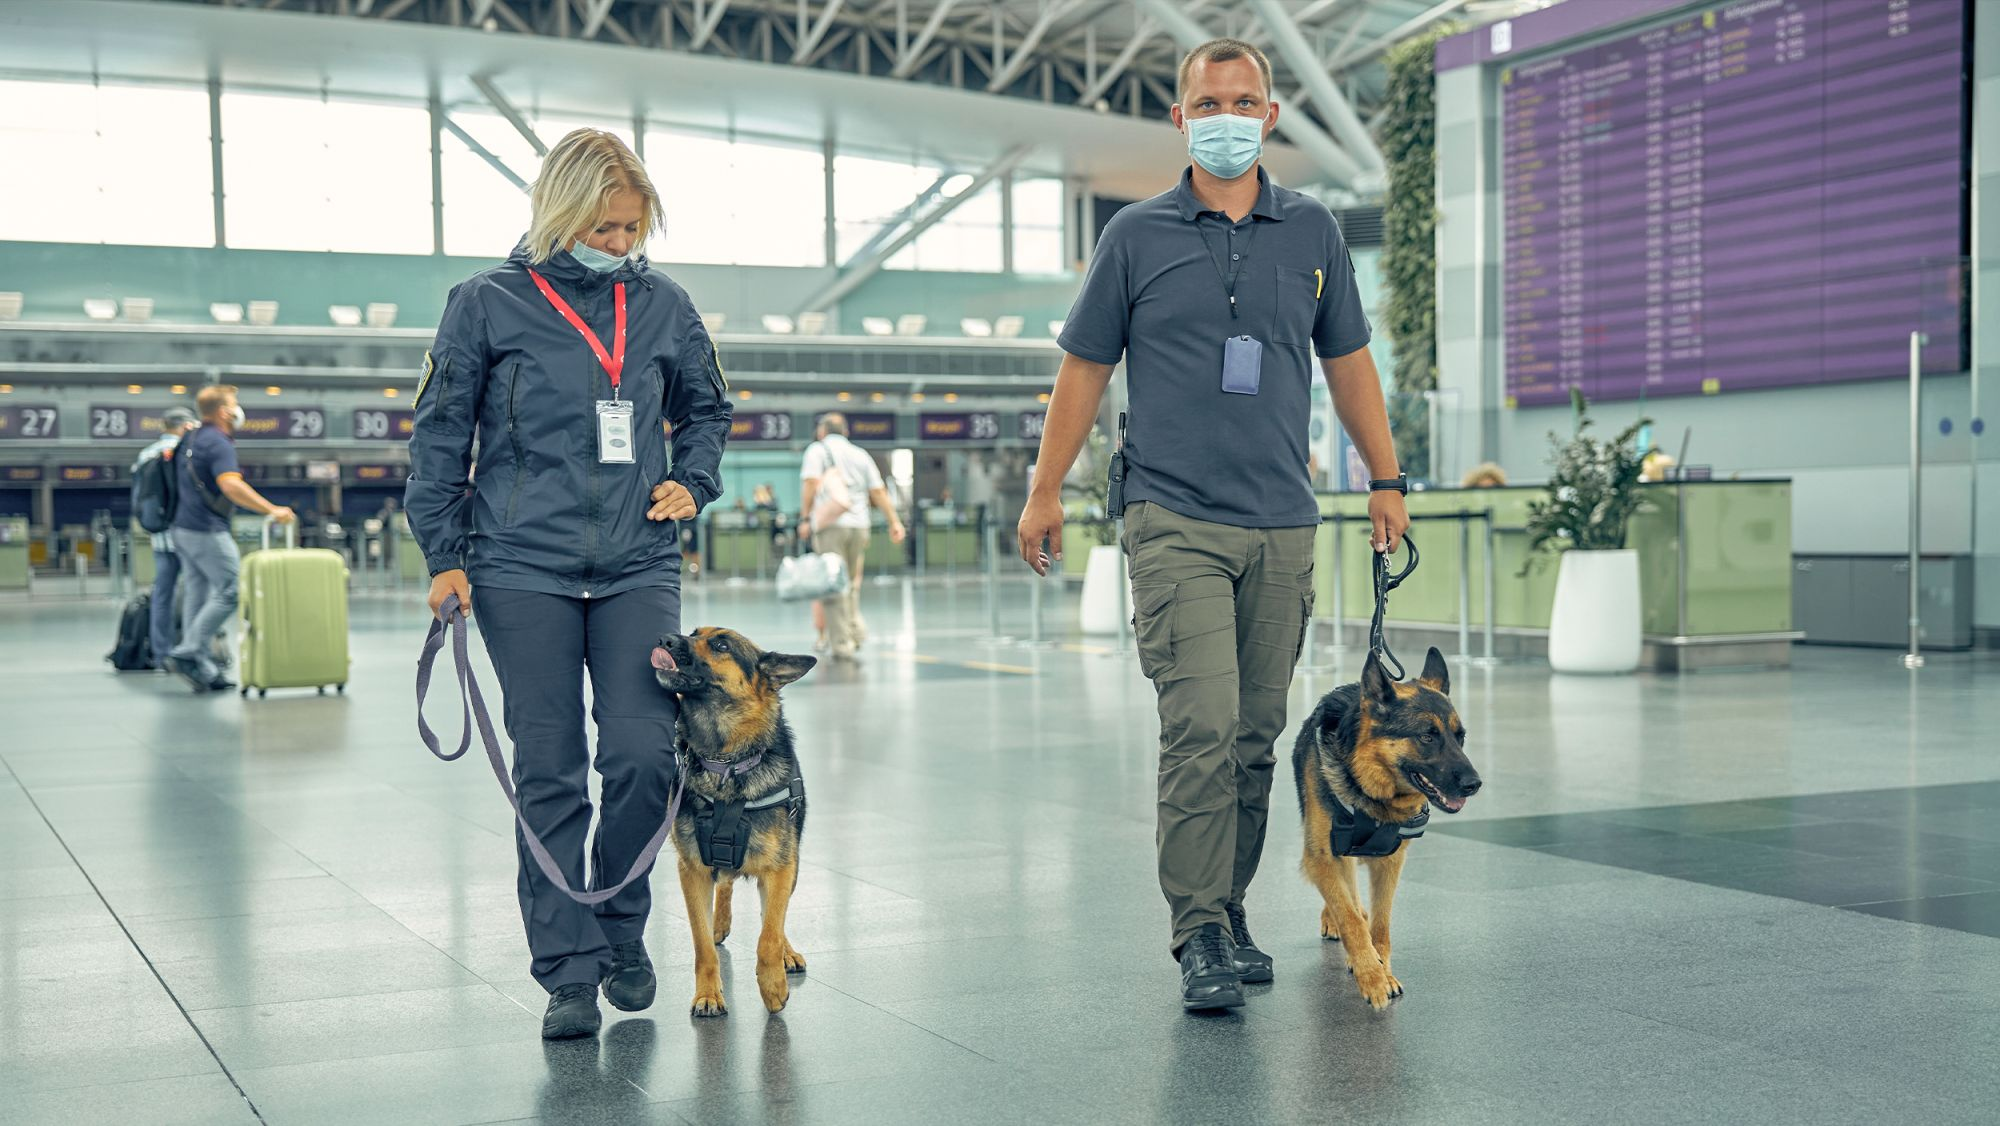 Sniffer dogs and handlers in an airport